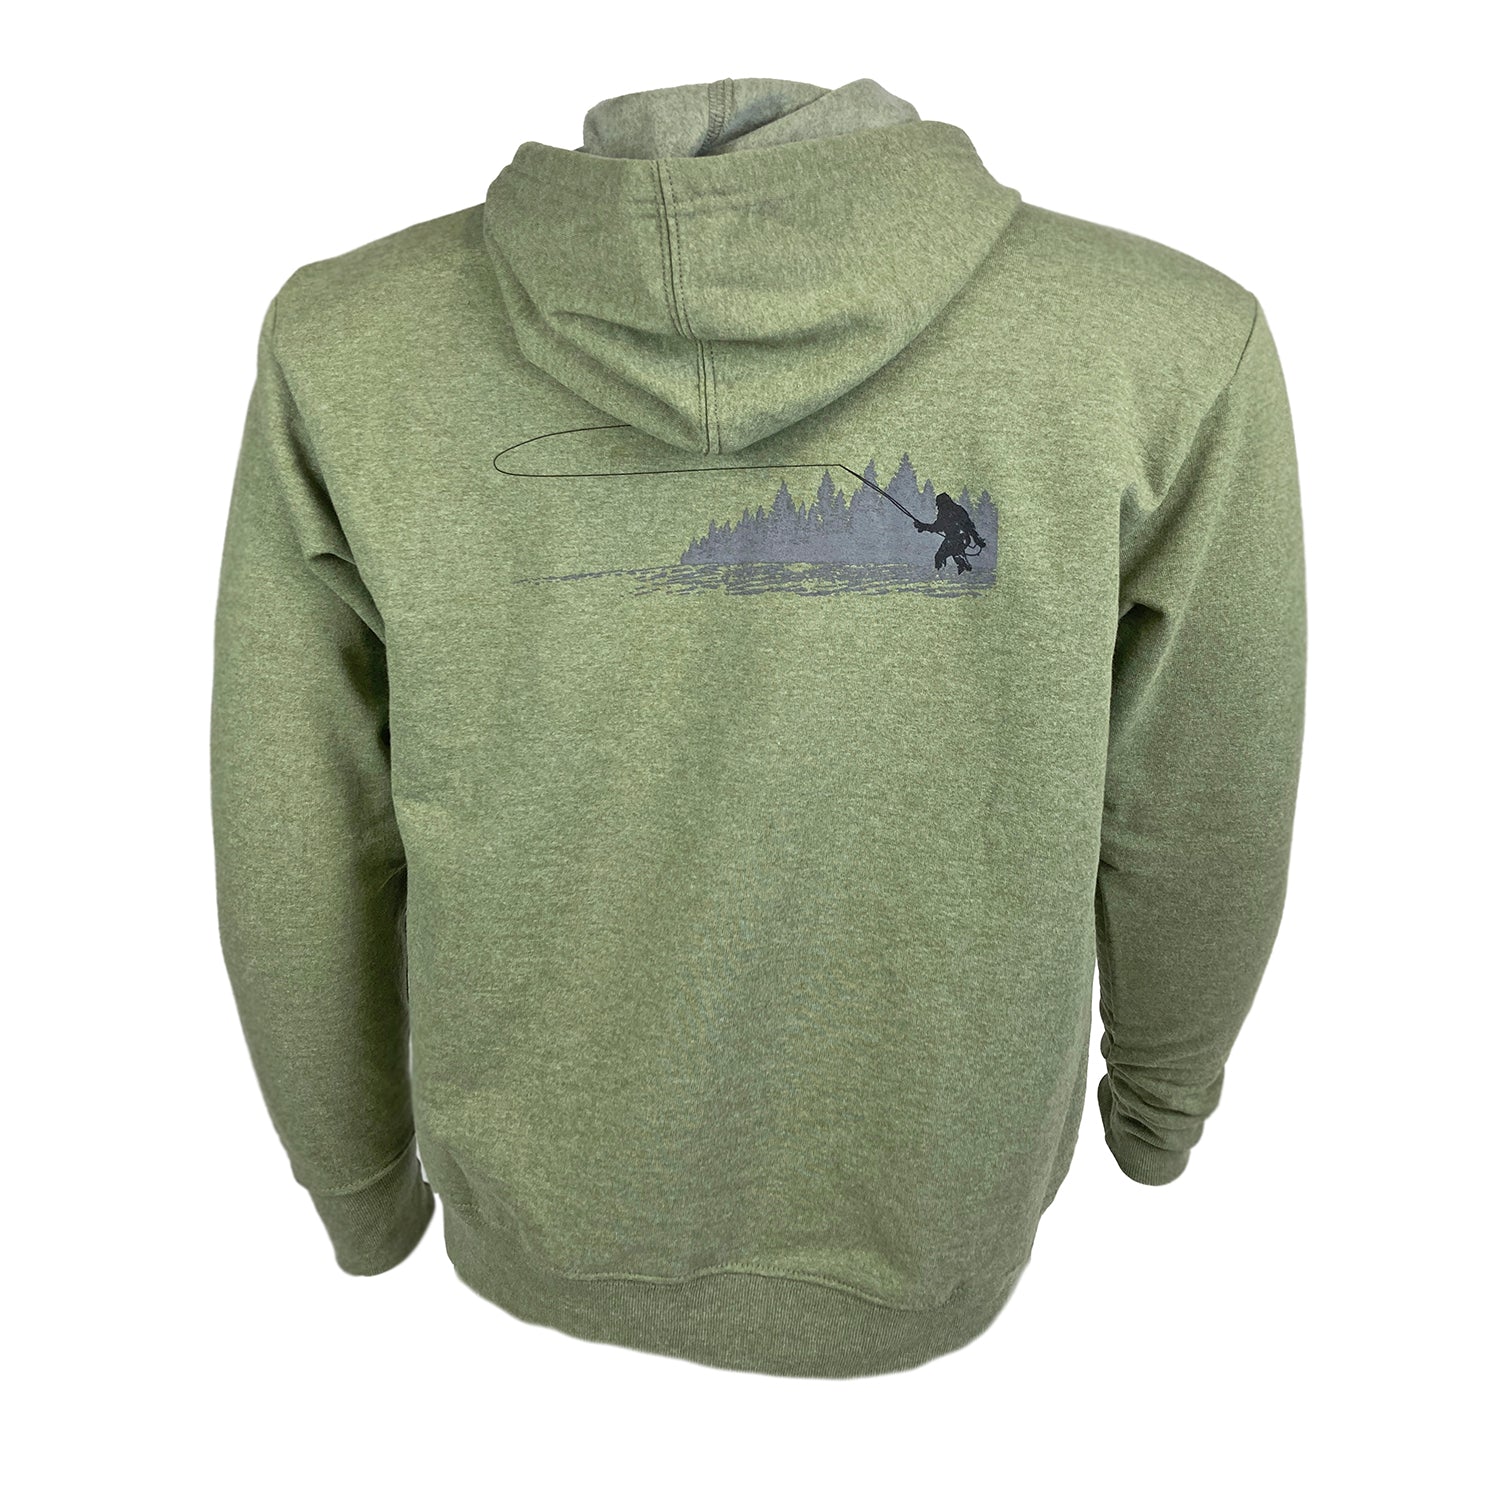 Green hoody shown from the back with artistically rendered fishing sasquatch in river scene across the shoulder blades.